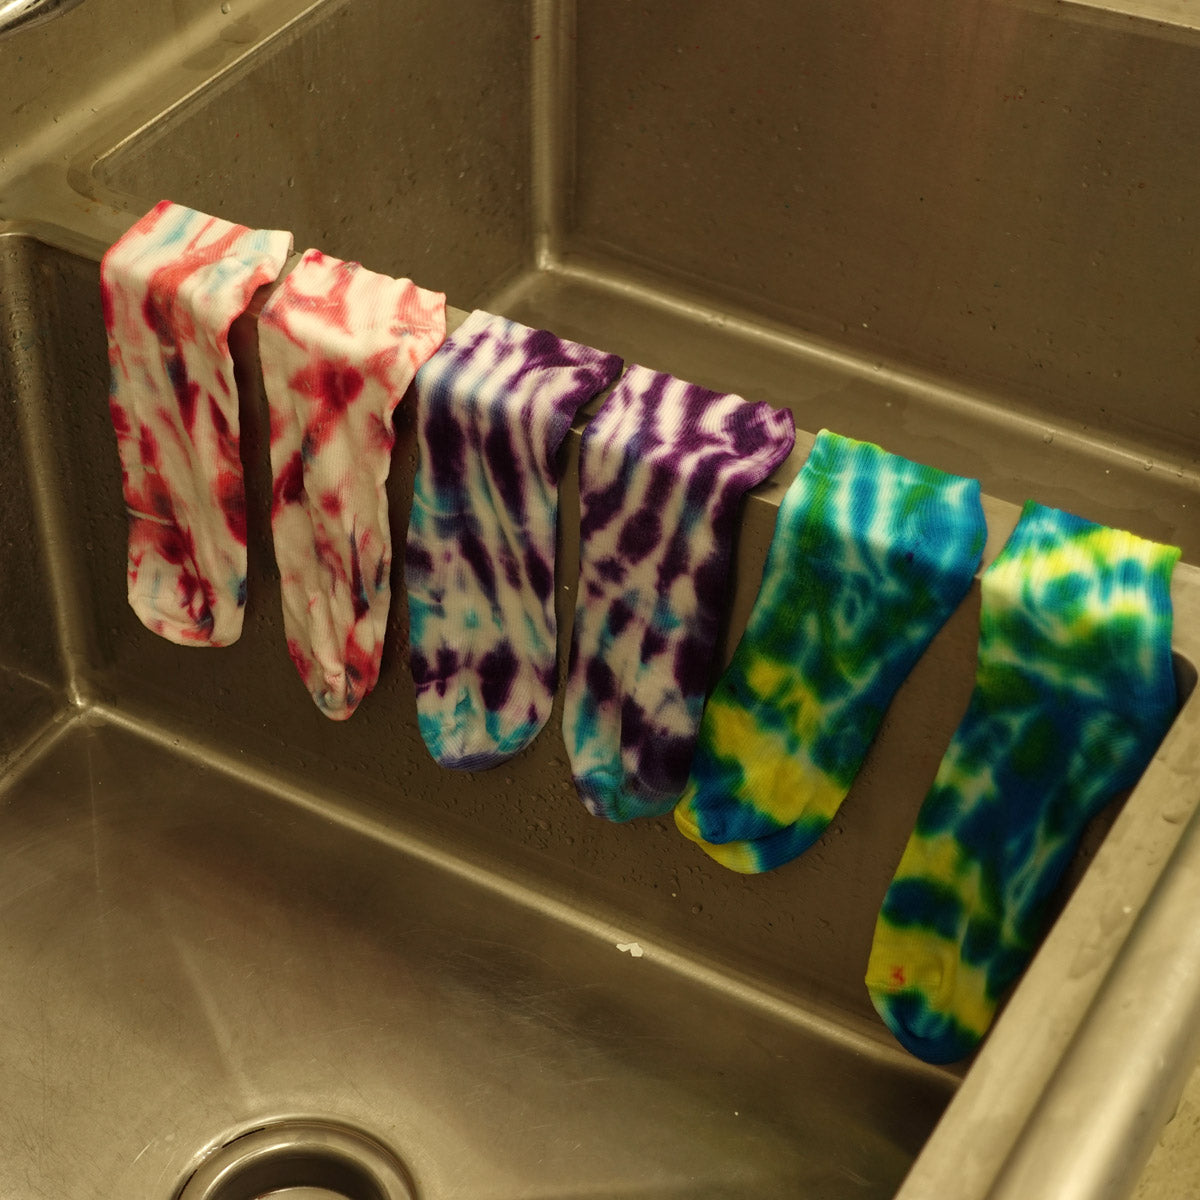 Tie-dyed socks that have been rinsed and are ready to wash.